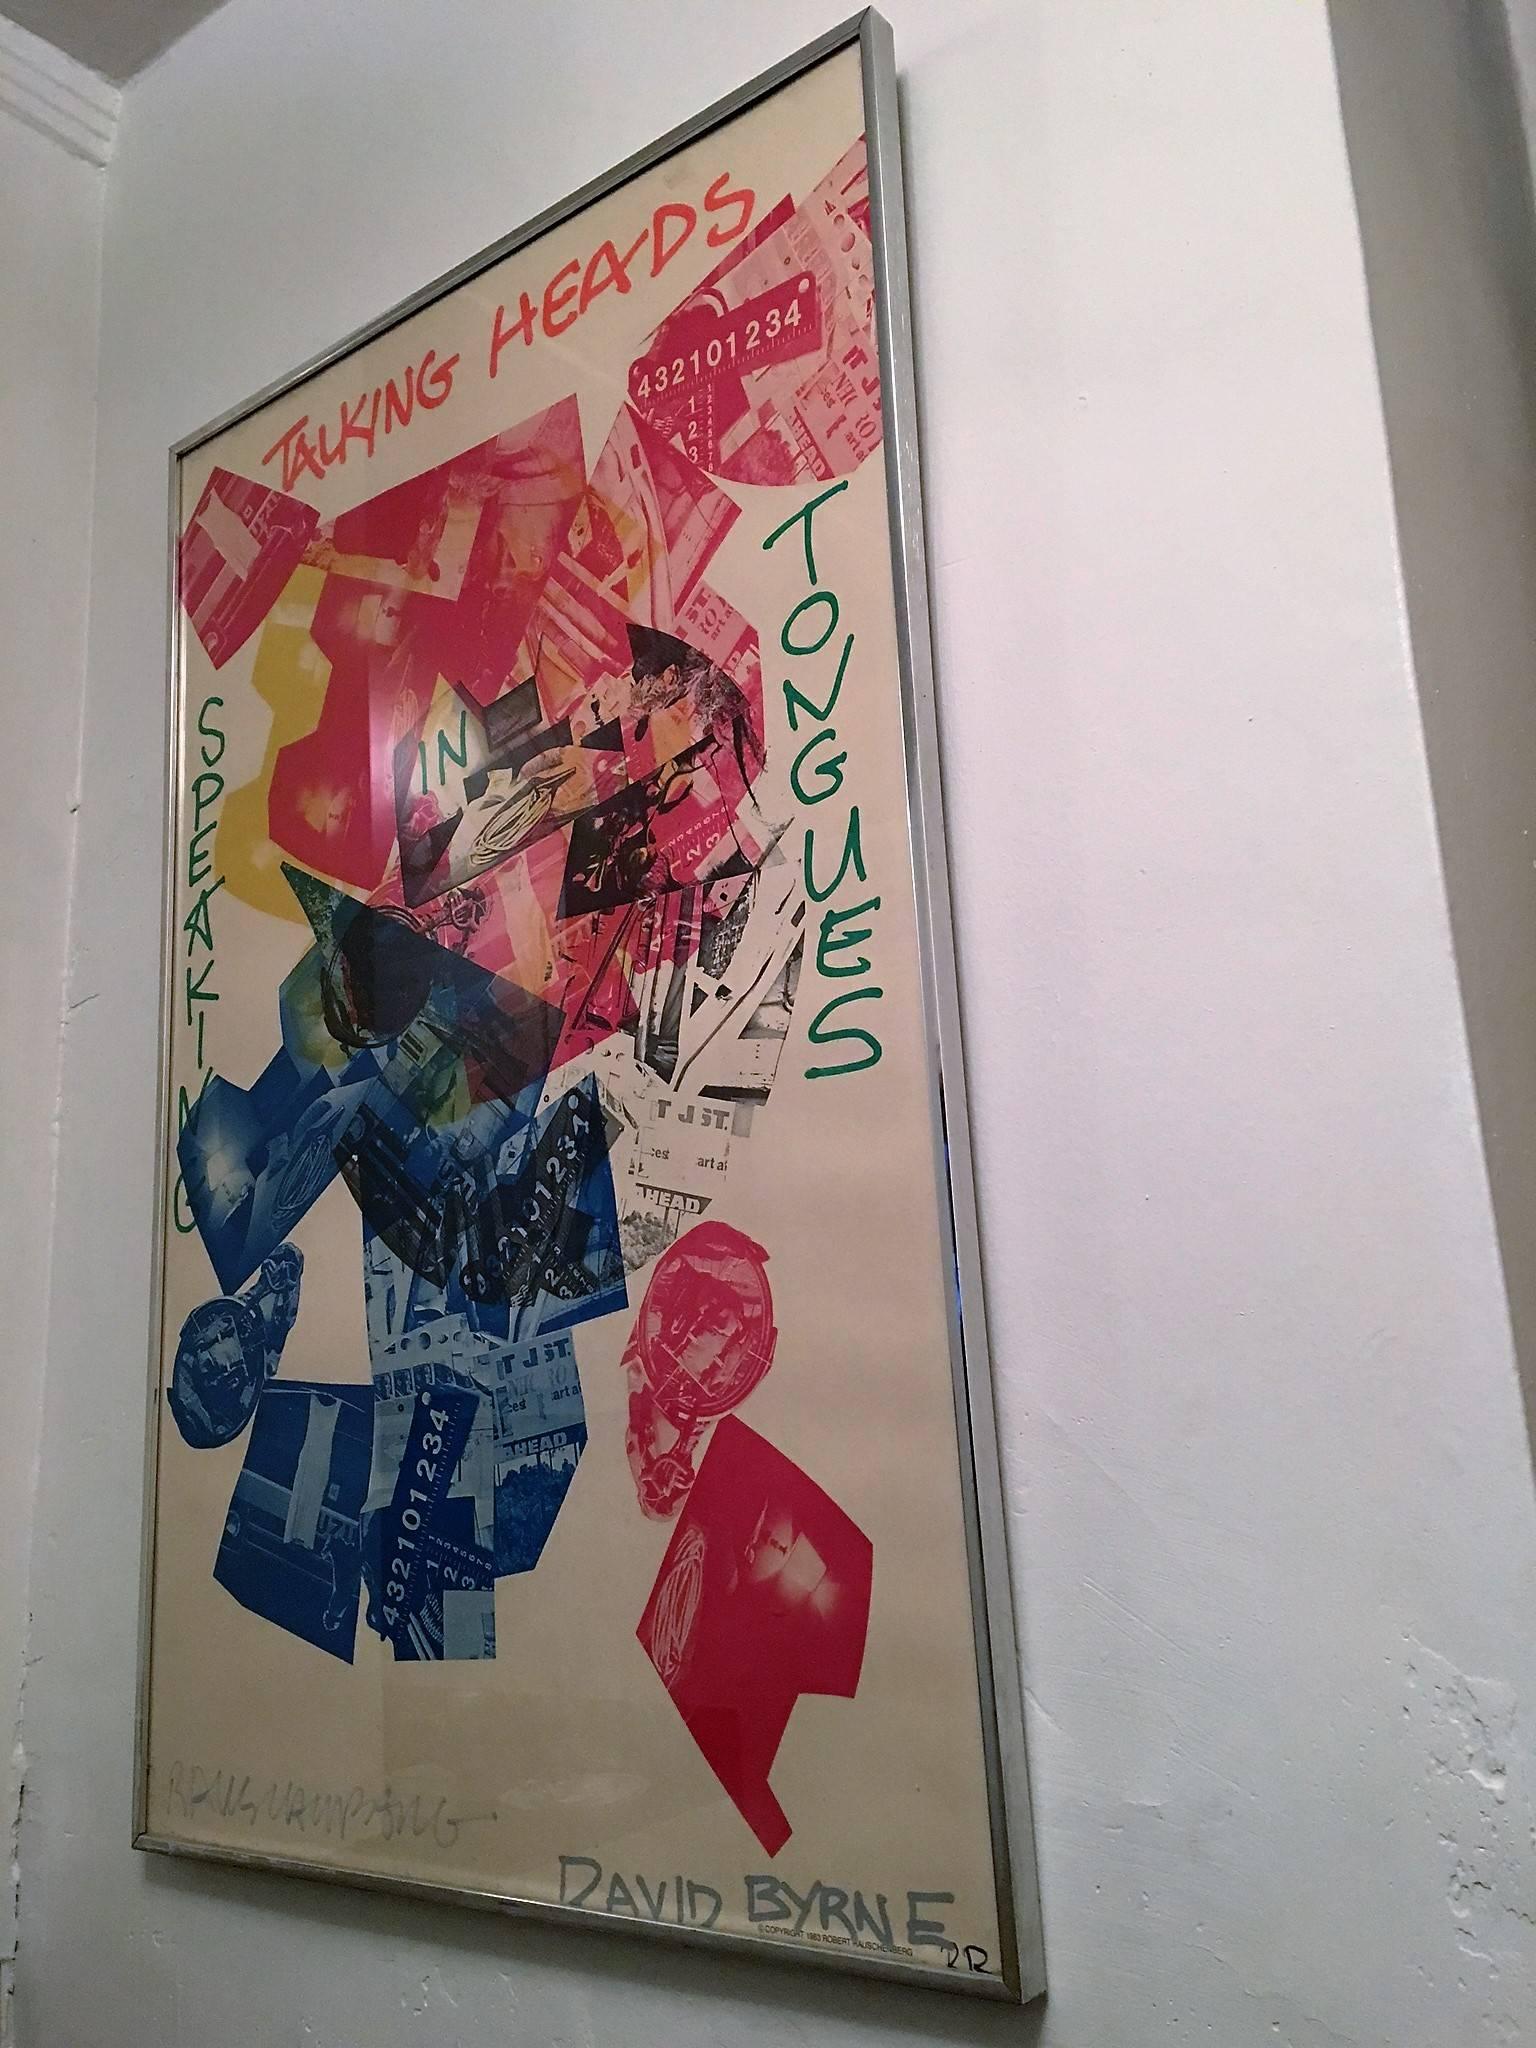 Great limited edition colorful framed poster of the talking heads 'speaking in tongues' poster. Designed and hand signed by artist Robert Rauschenberg in the 1980s. Both David Byrne and Robert Rauschenberg signed this in person in the 1980s, these